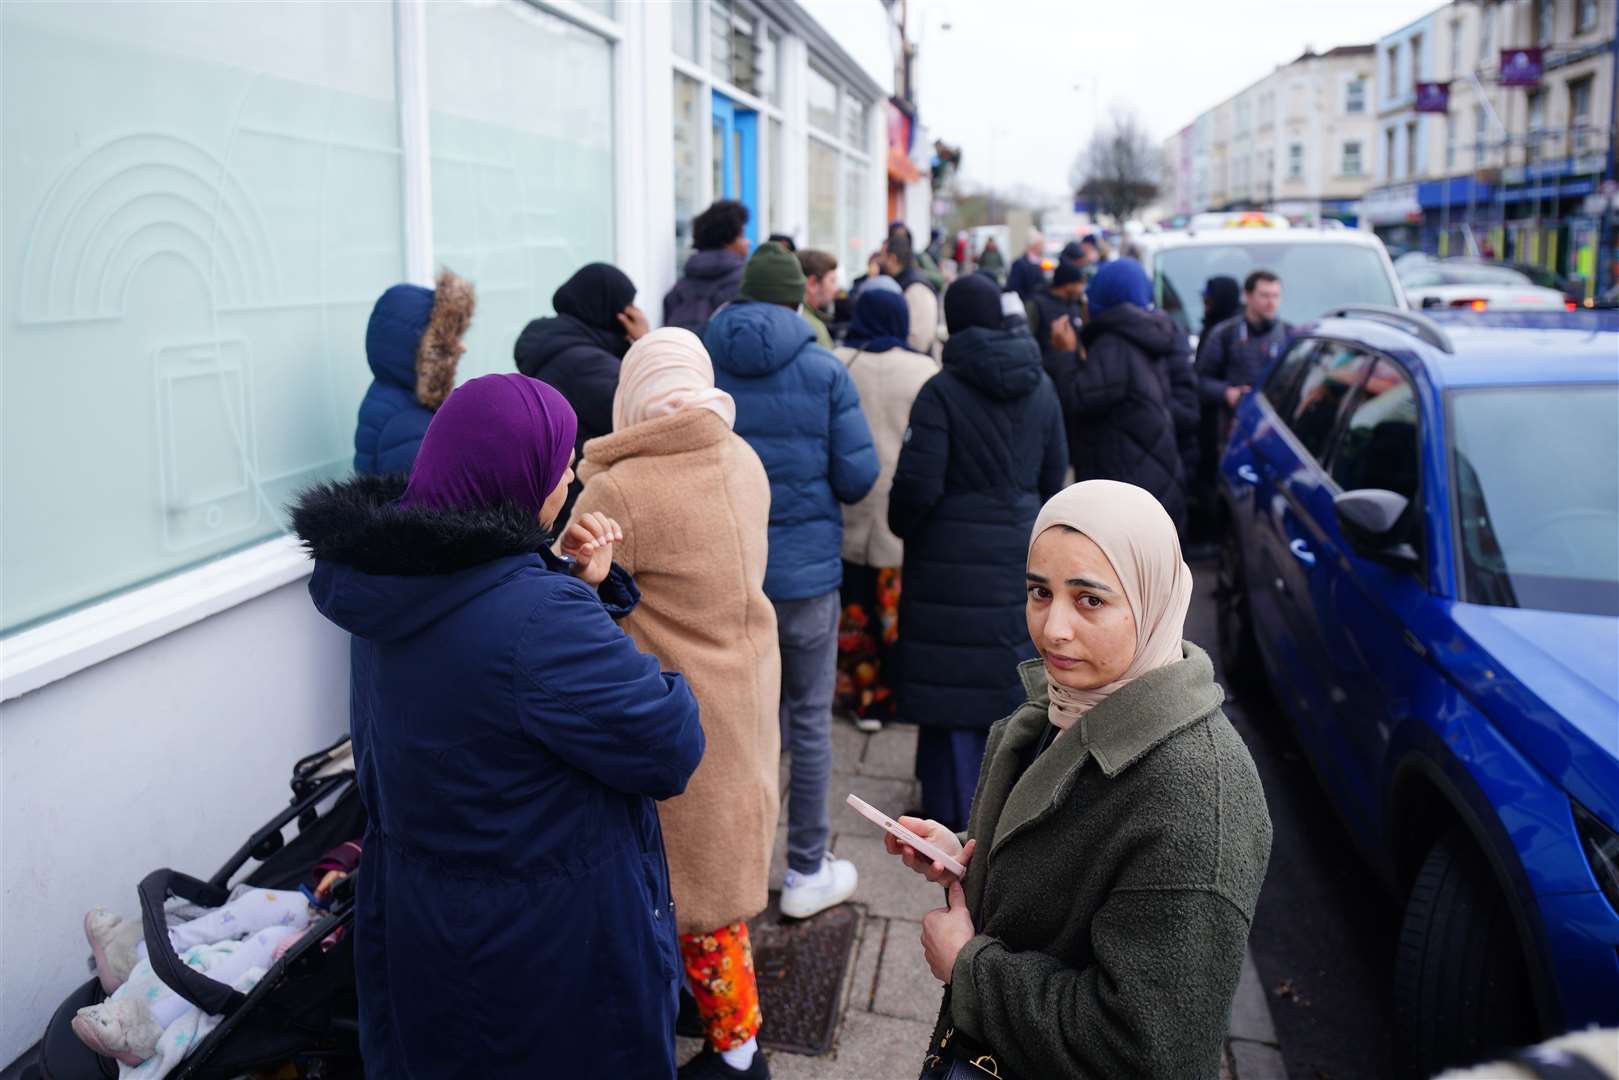 People in line outside the St Pauls dental practice in Bristol last month (Ben Birchall/PA)